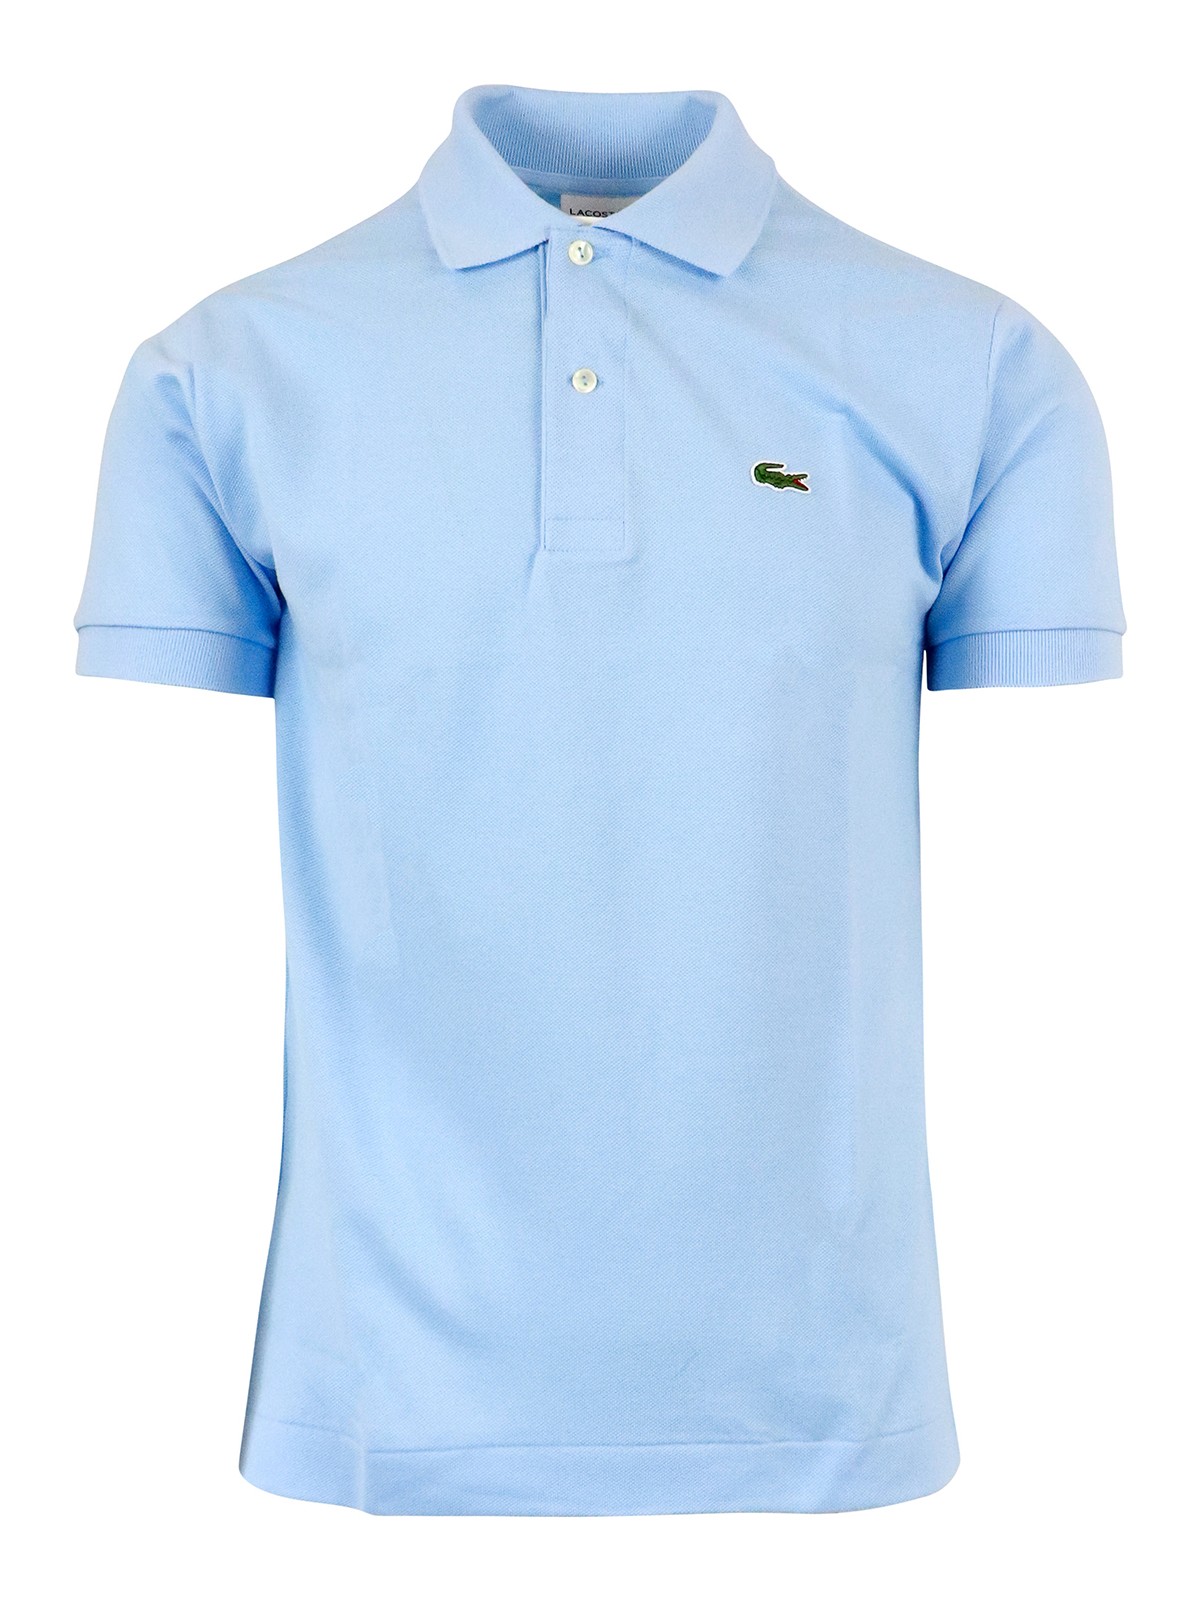 shirts Lacoste Piqué polo - 1212HBP | Shop online at THEBS